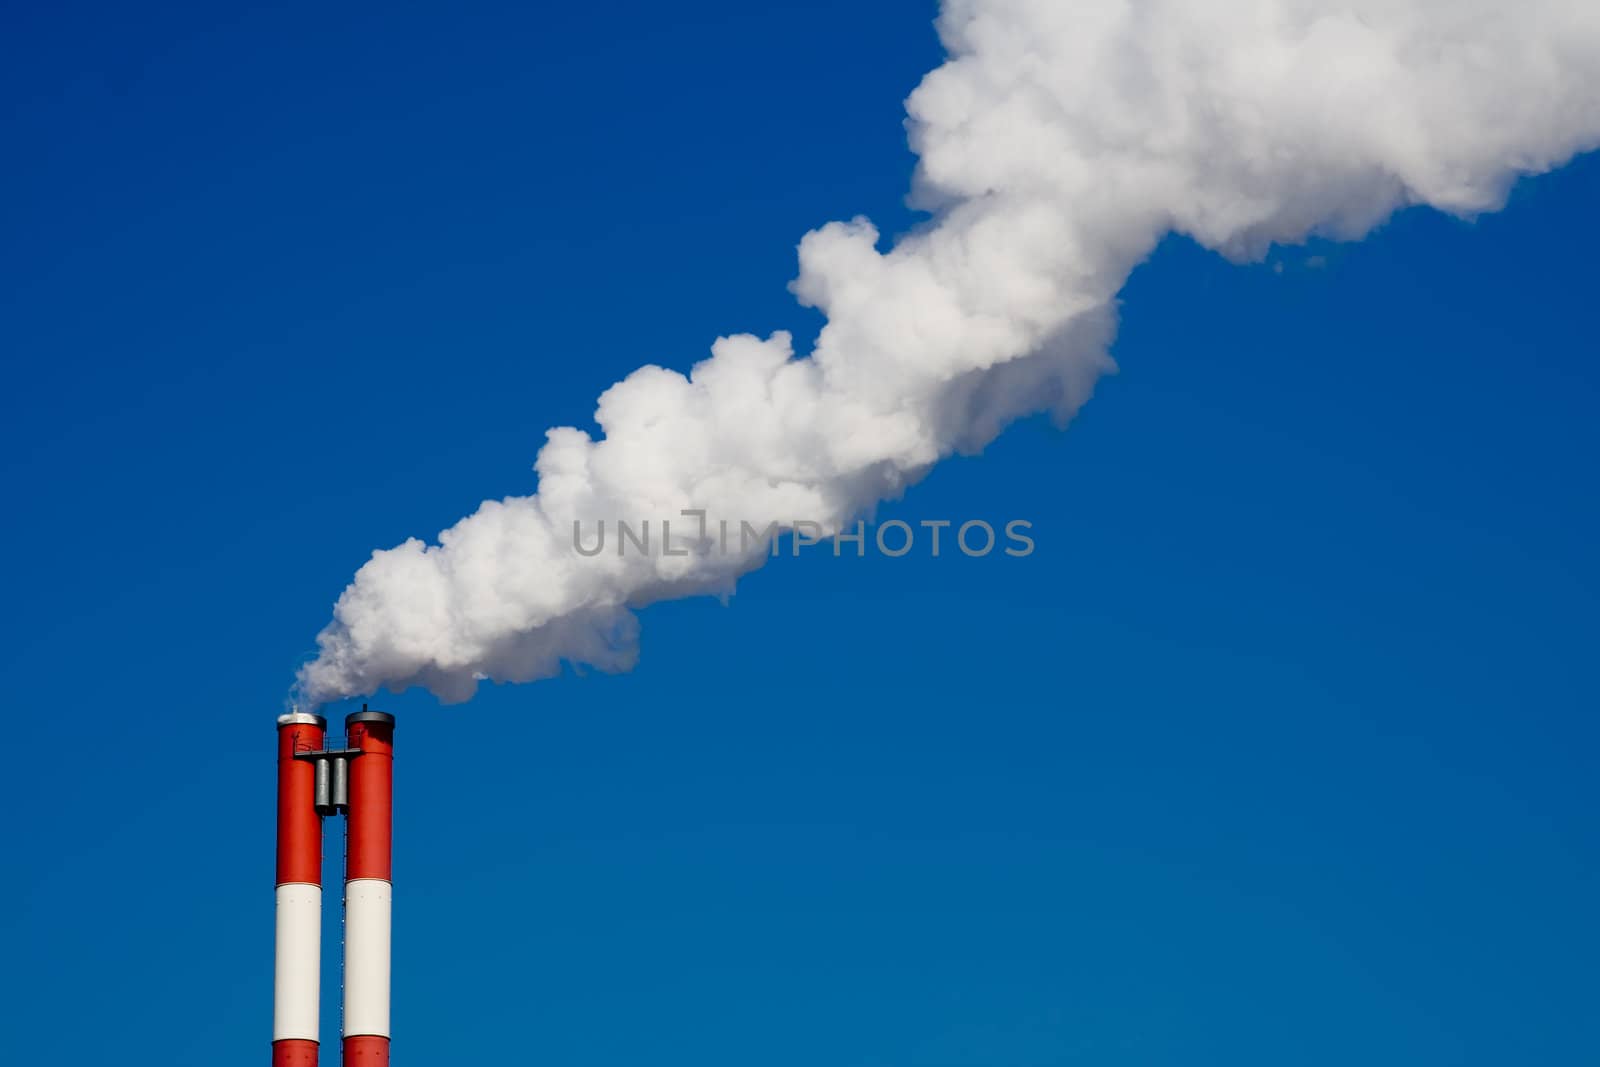 The chimney of a factory with white smoke